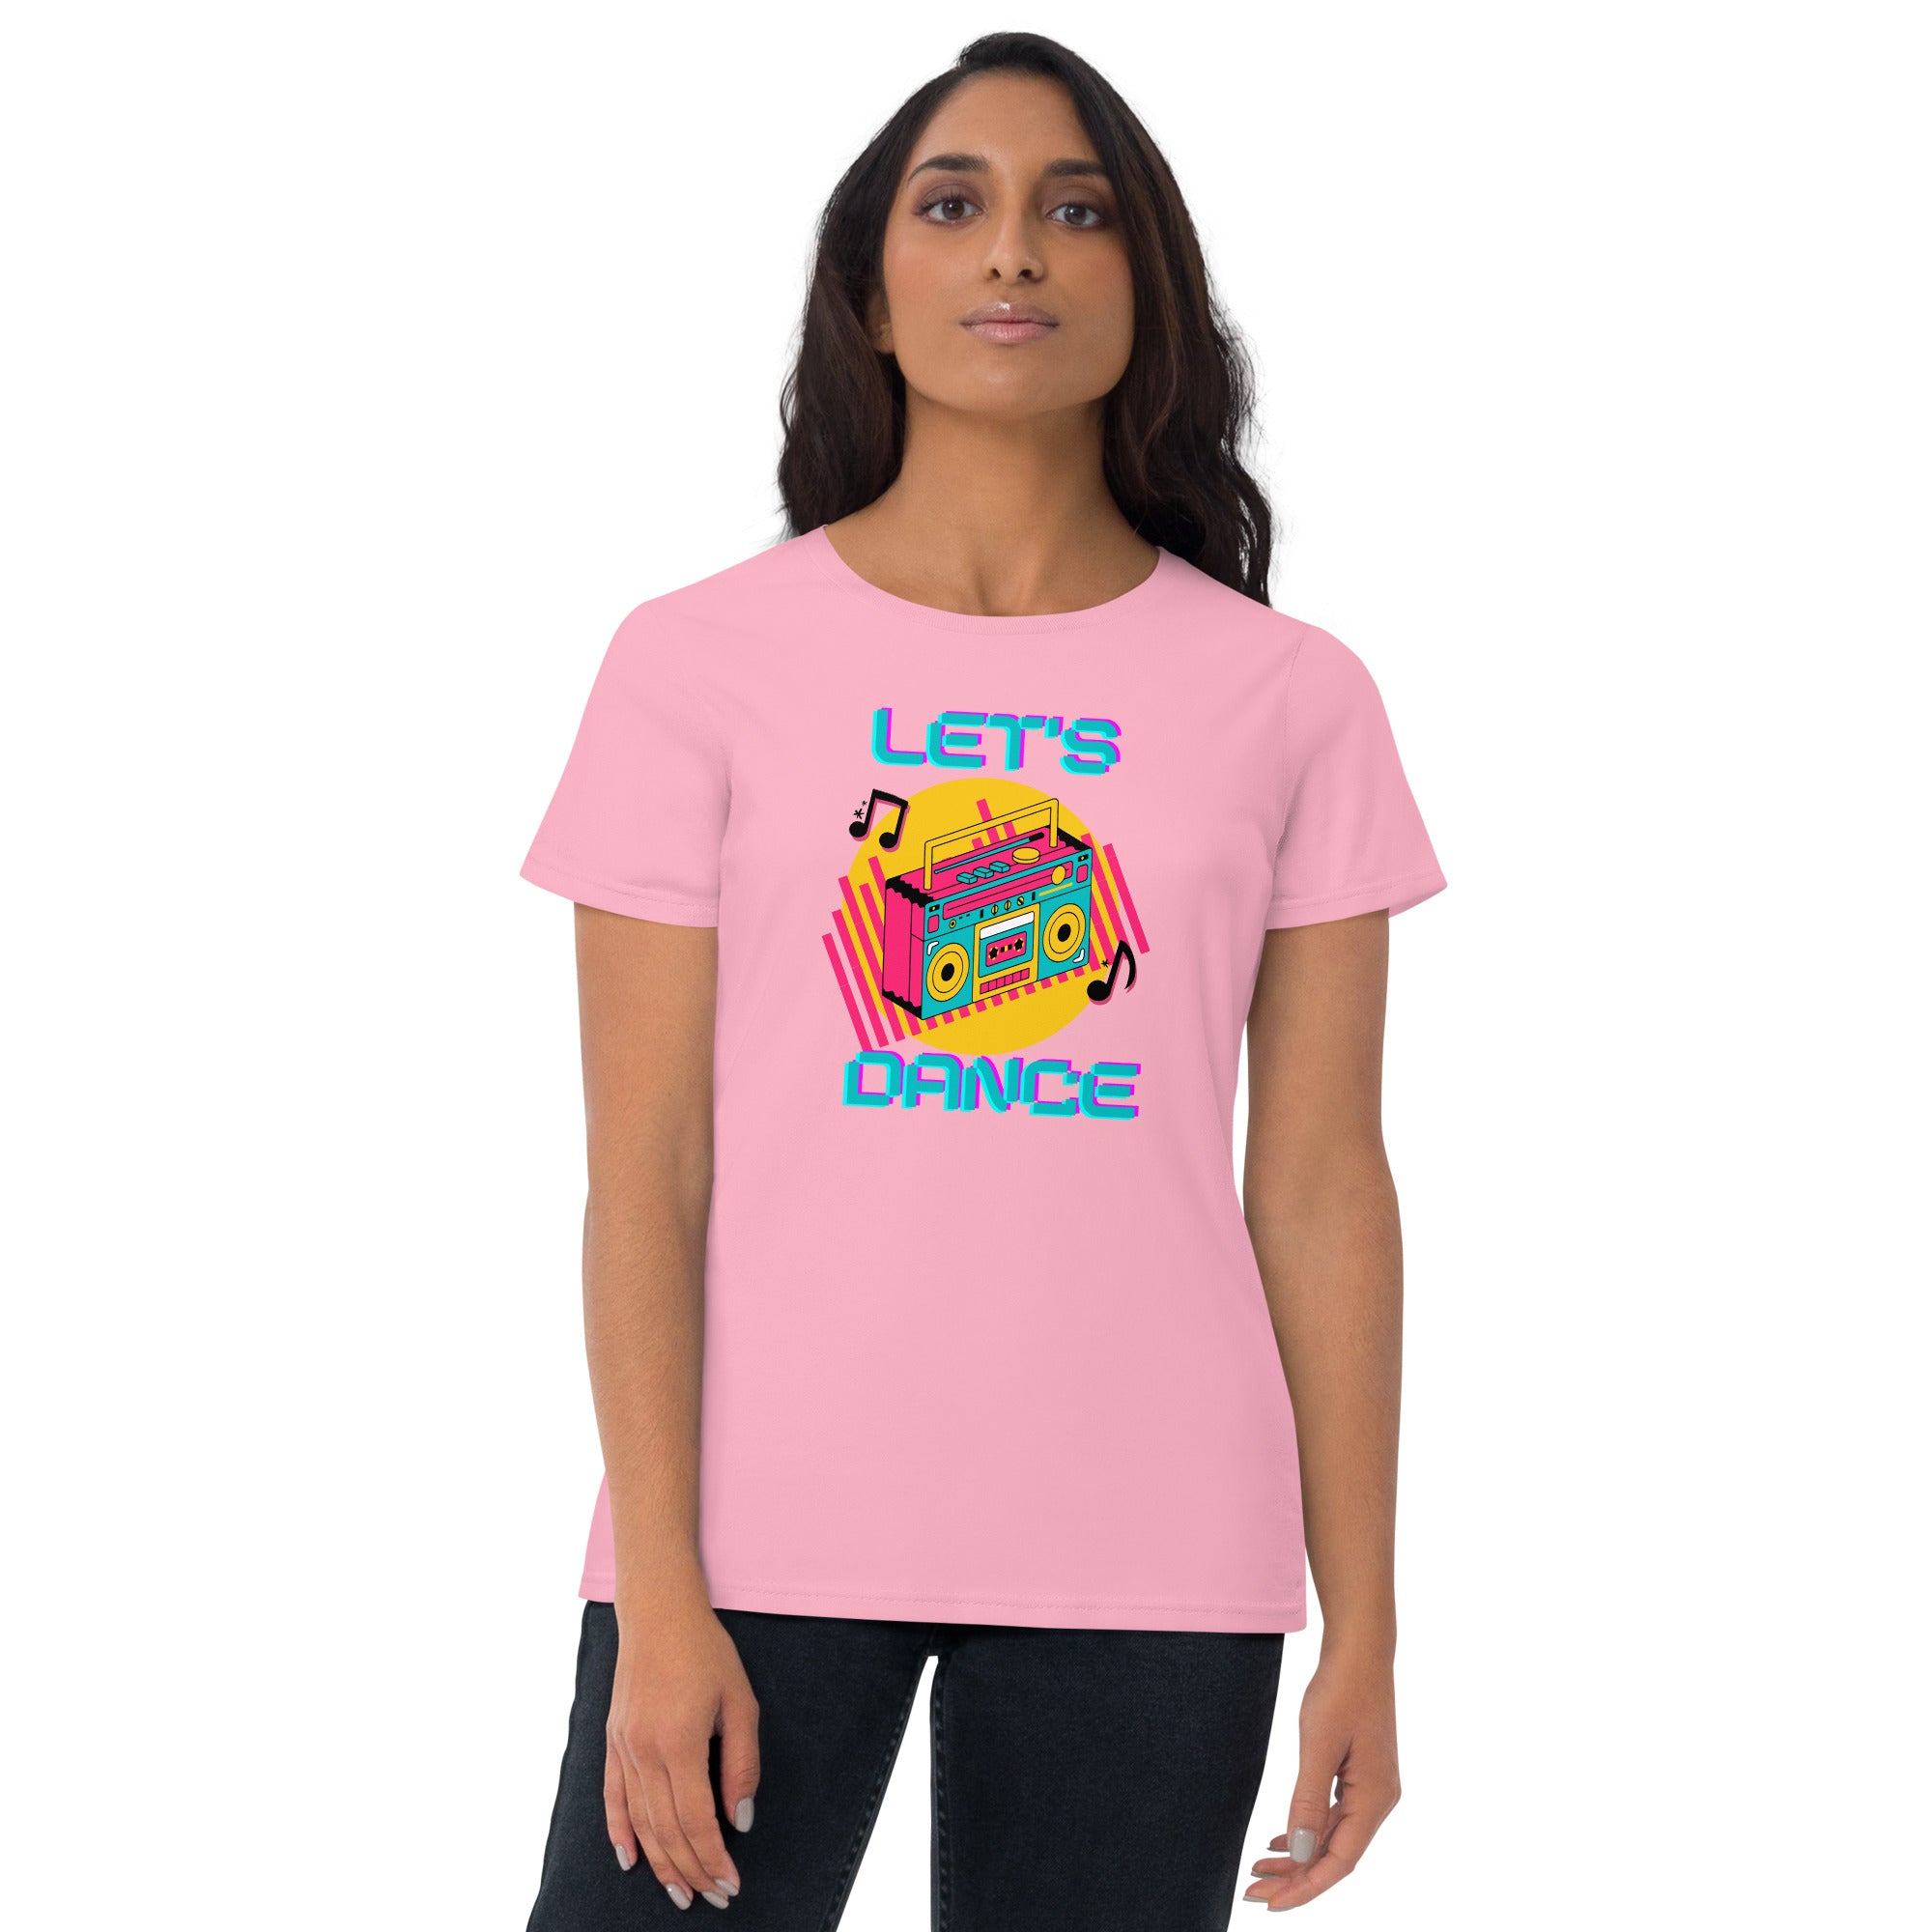 Let's Dance Women's Fitted T-Shirt